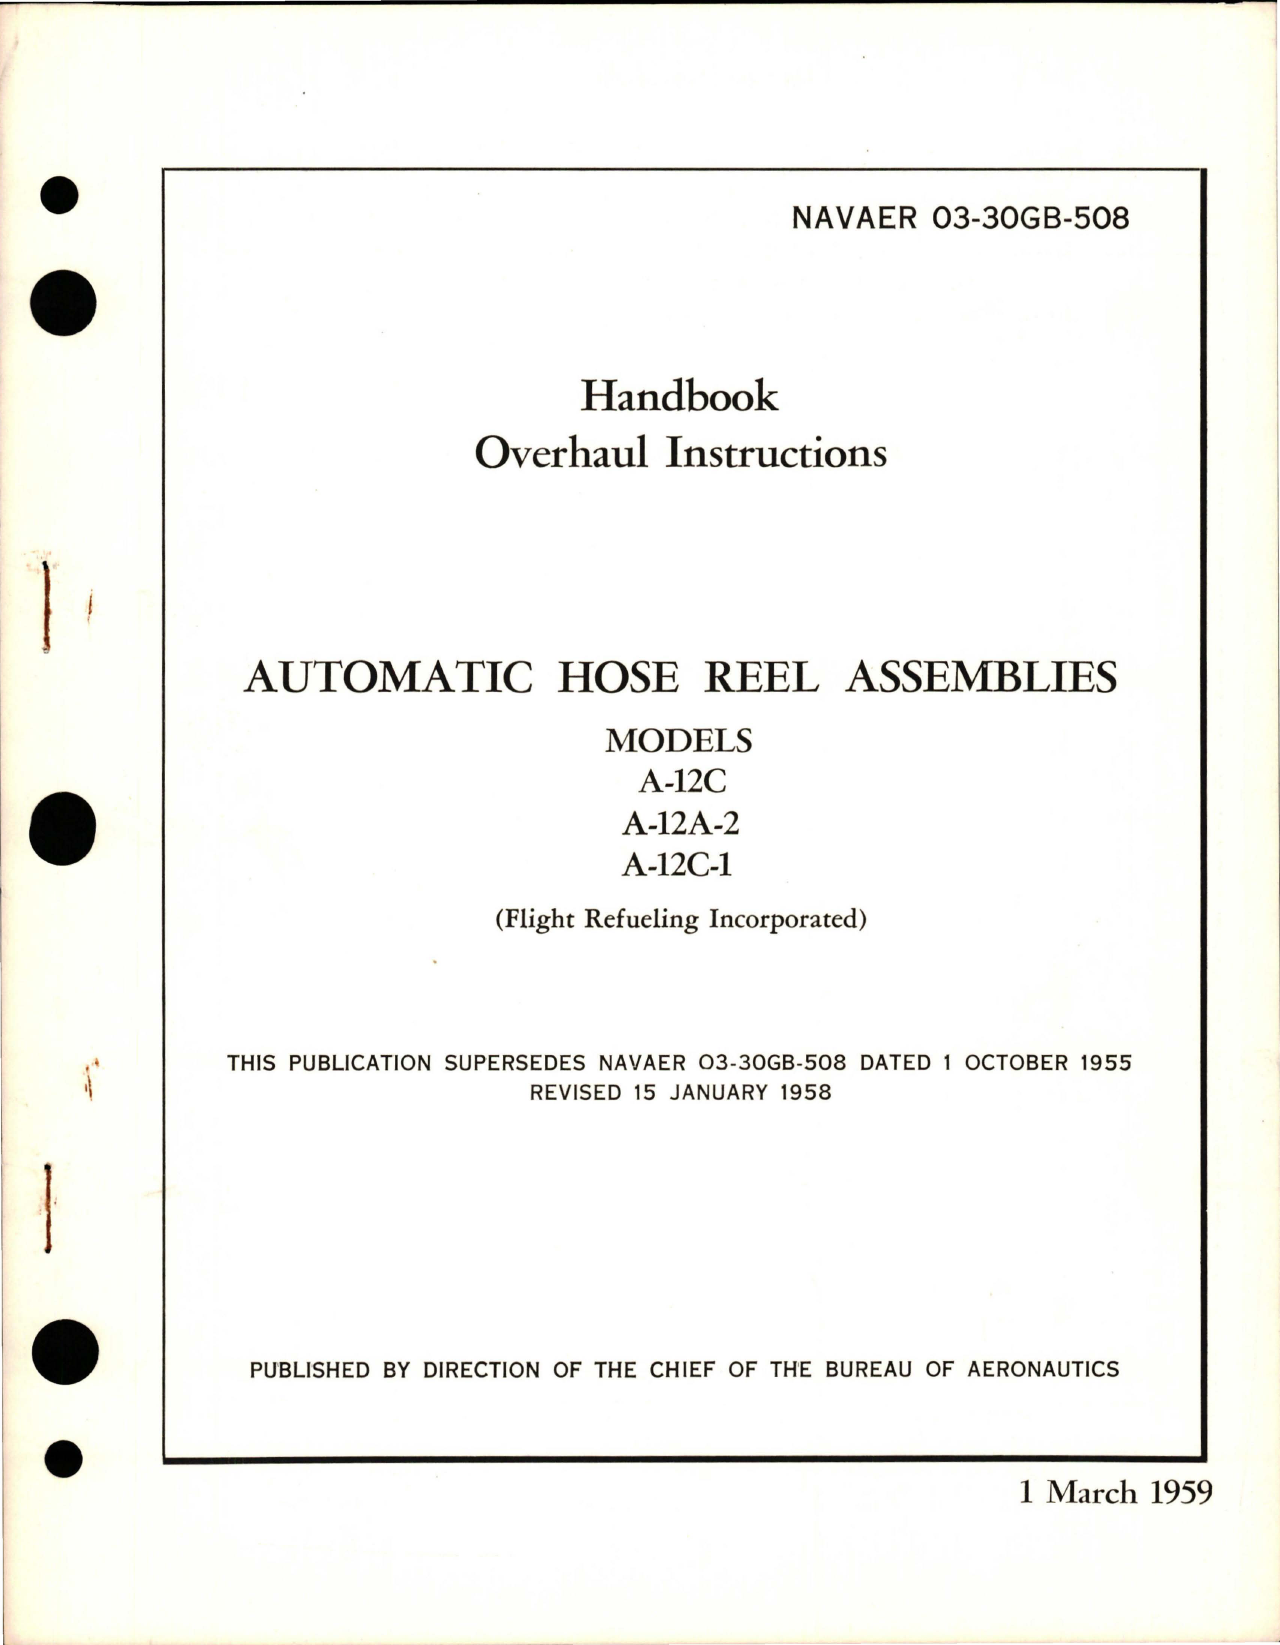 Sample page 1 from AirCorps Library document: Overhaul Instructions for Automatic Hose Reel Assemblies - Models A-12C, A-12A-2, and A-12C-1 